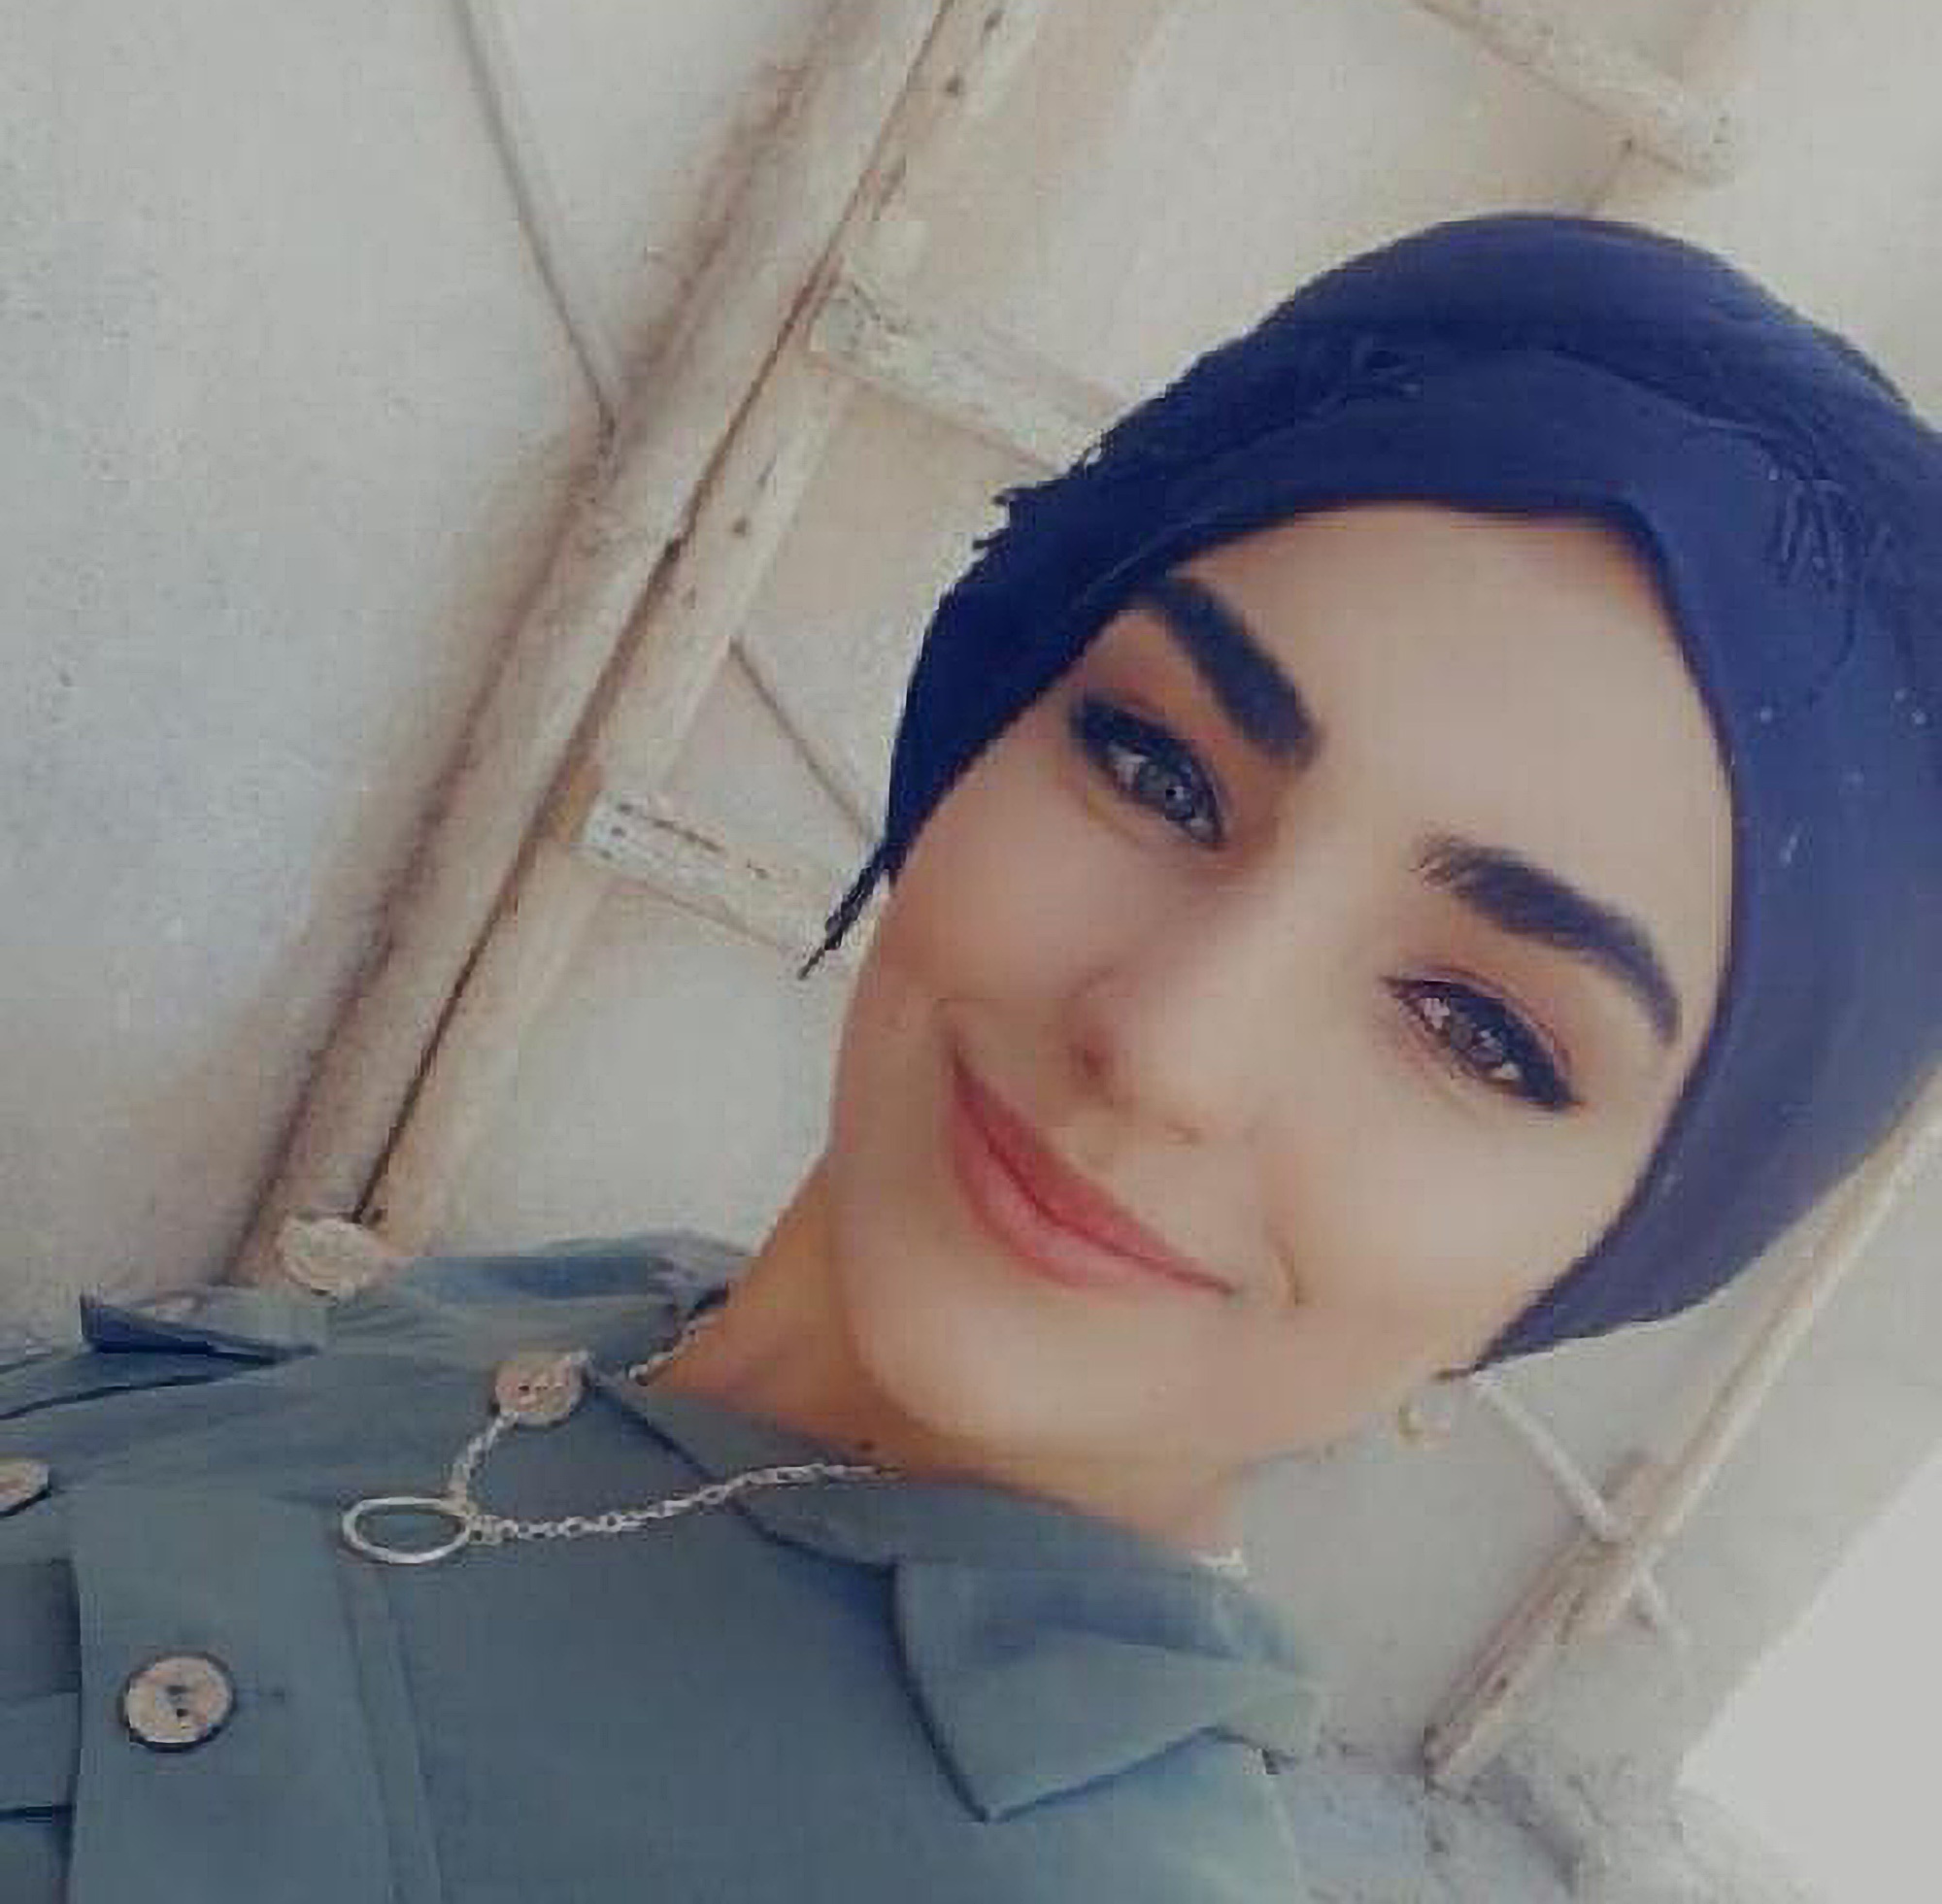 Tragic Turkish Schoolgirl Dies After Refusing to Be Cousins Second Wife